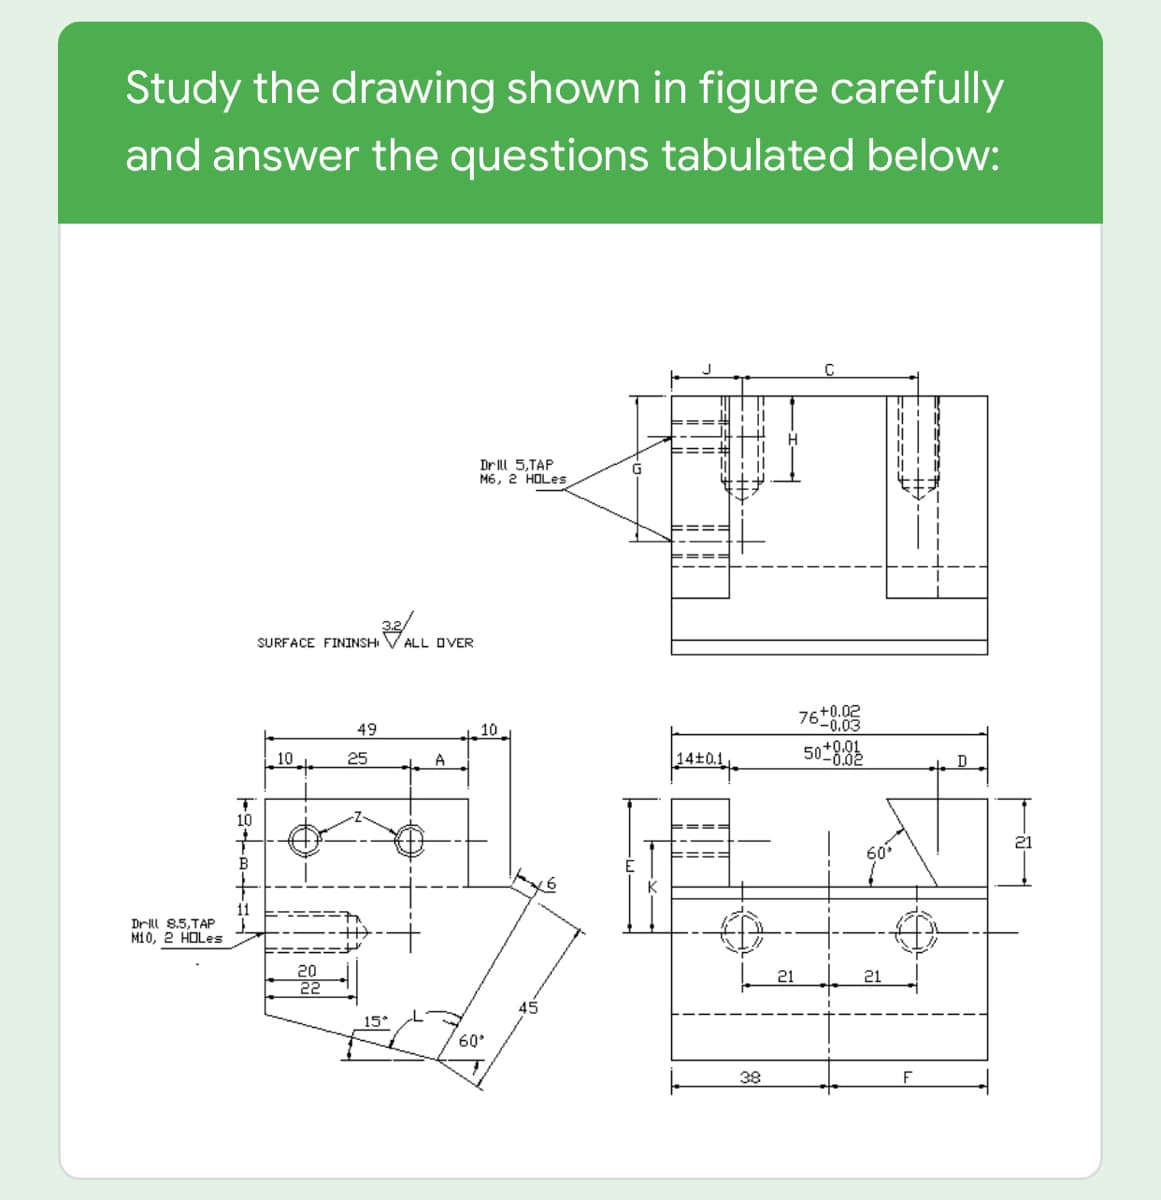 Study the drawing shown in figure carefully
and answer the questions tabulated below:
C
DrIll 5,TAP
M6, 2 HOLES
SURFACE FININSHI
ALL OVER
76+0.02
-0.03
49
10
50
10
25
A
14+0.1
D
10
60
11
Drll 8,5,TAP
M10, 2 HOLes
20
22
21
21
45
15*
60°
38
F
